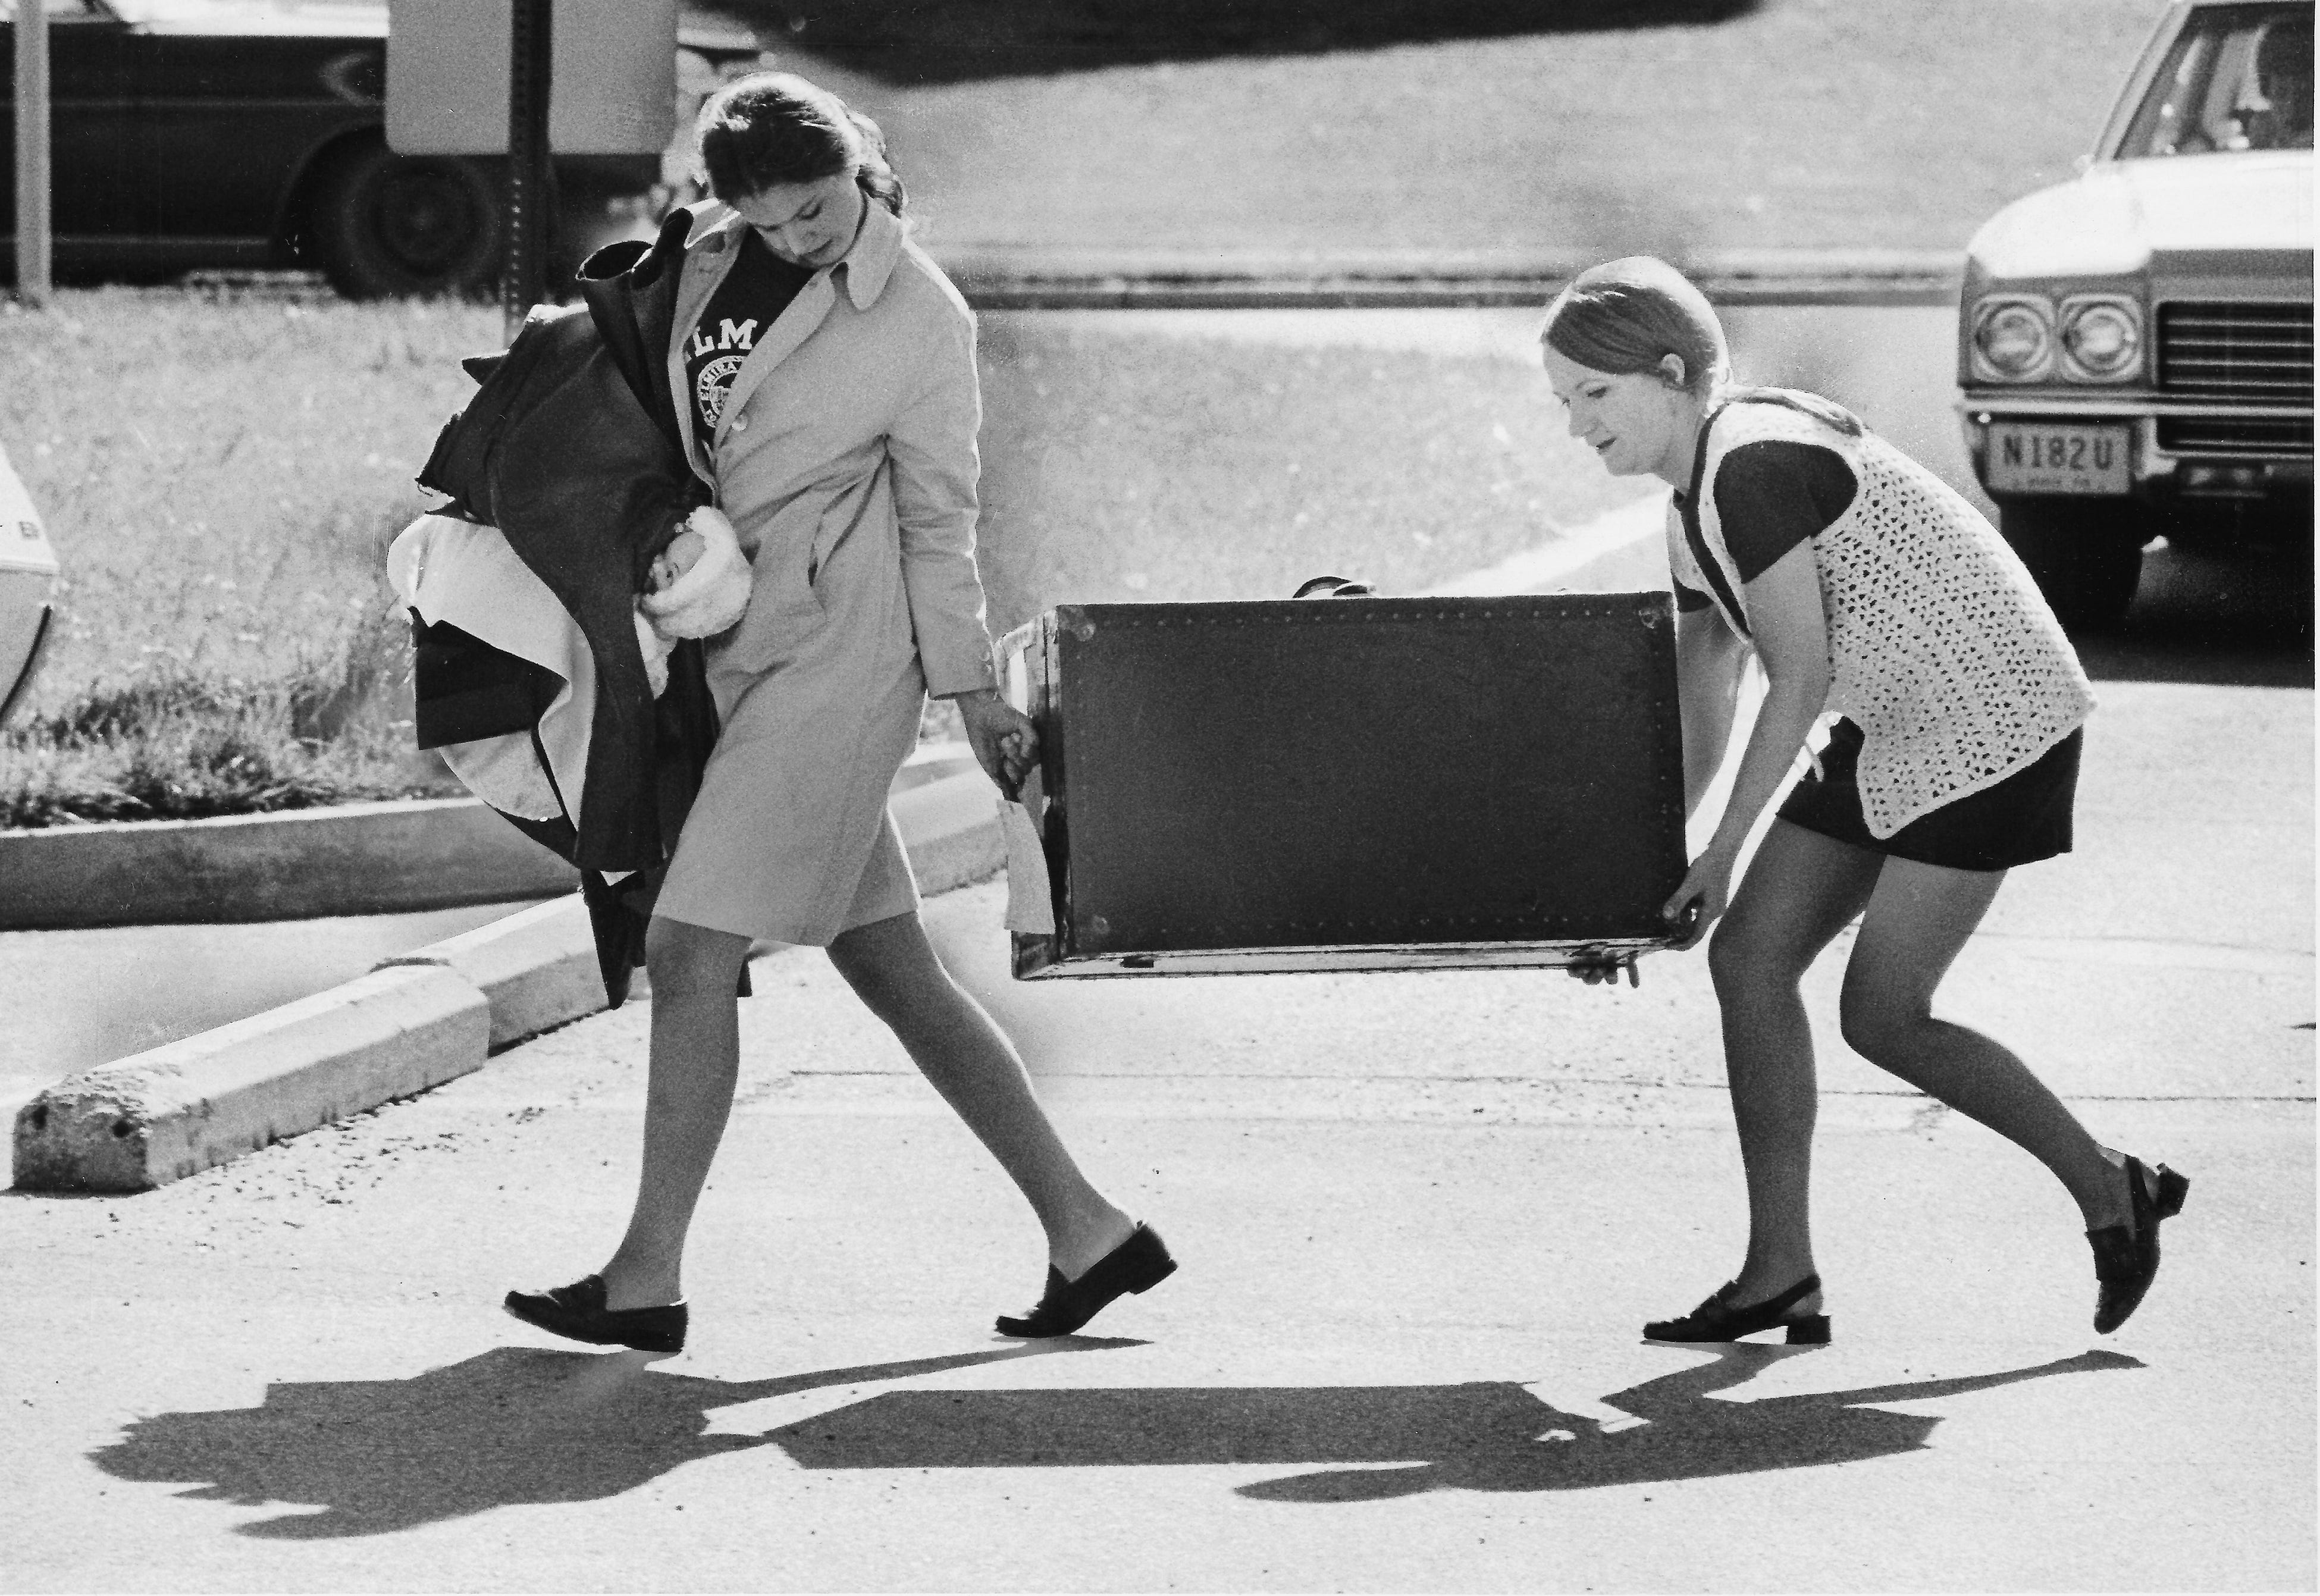 Carolyn Johnson (left), 22, from Chesterland, Ohio, gets some help from Phyllis Gongol, 23, from Canisteo, New York, May 18, 1970. Students returned to campus to pick up their belongings in residence halls as a result of the campus closure following the shootings.